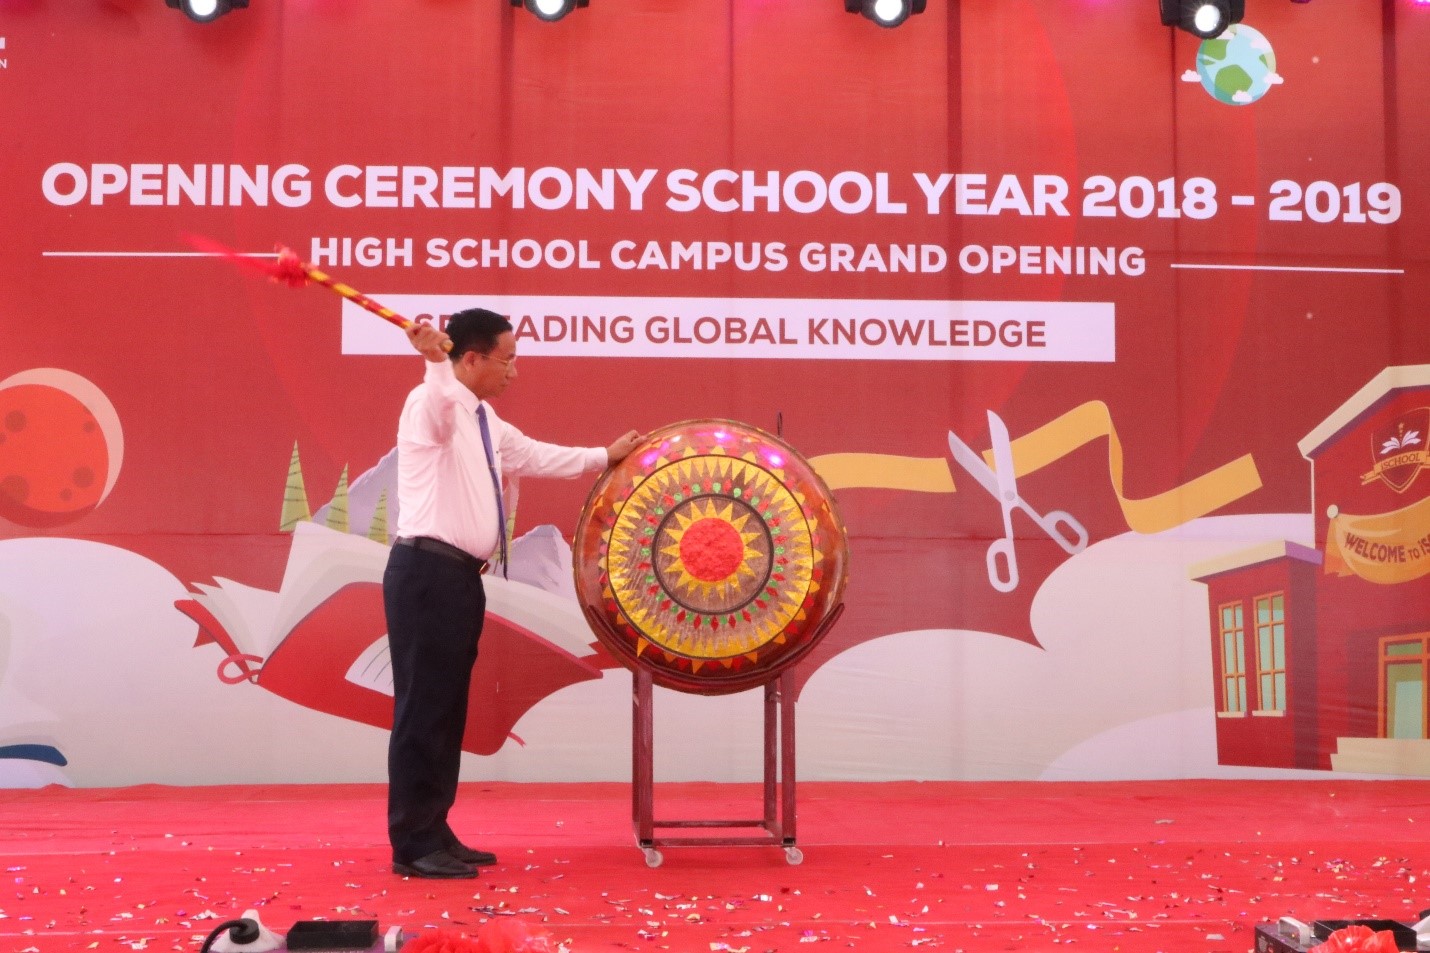 Mr. Le Dinh Son – Chairman of Ha Tinh People's Council drummed to open the new scholastic year